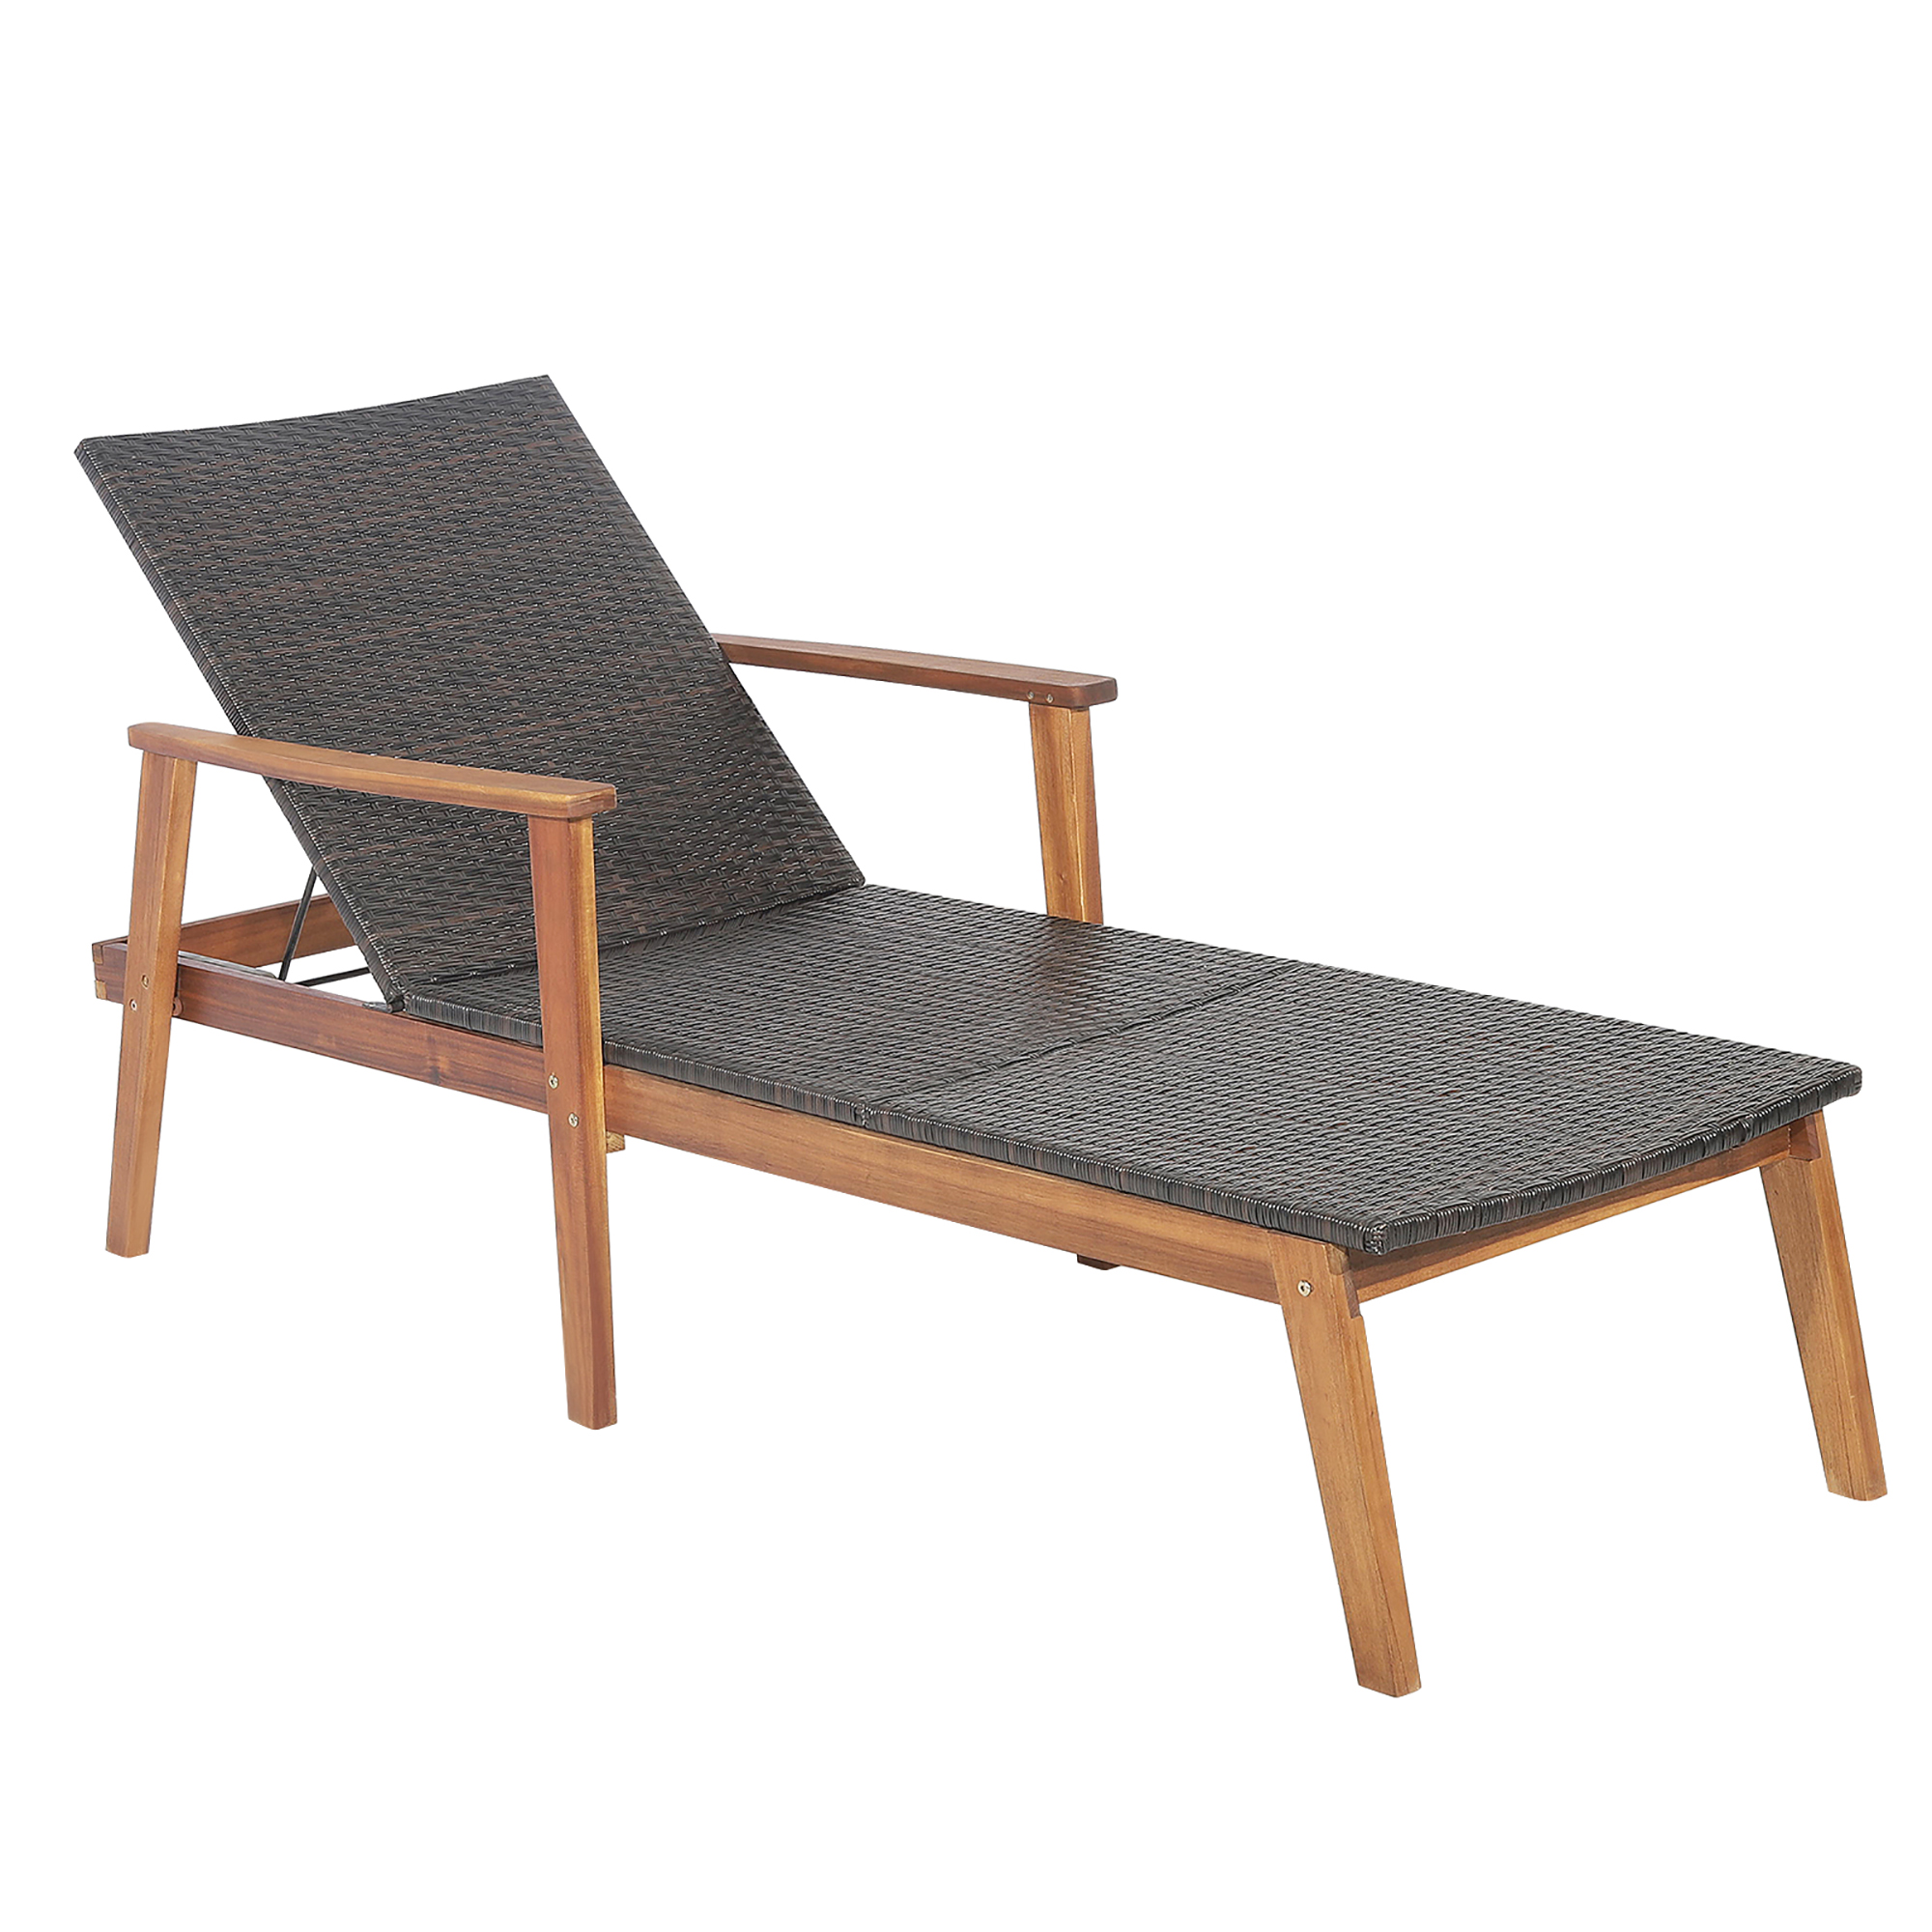 Costway Patio Rattan Chaise Lounge Chair Recliner Back Adjustable Acacia Wood Garden - image 2 of 8